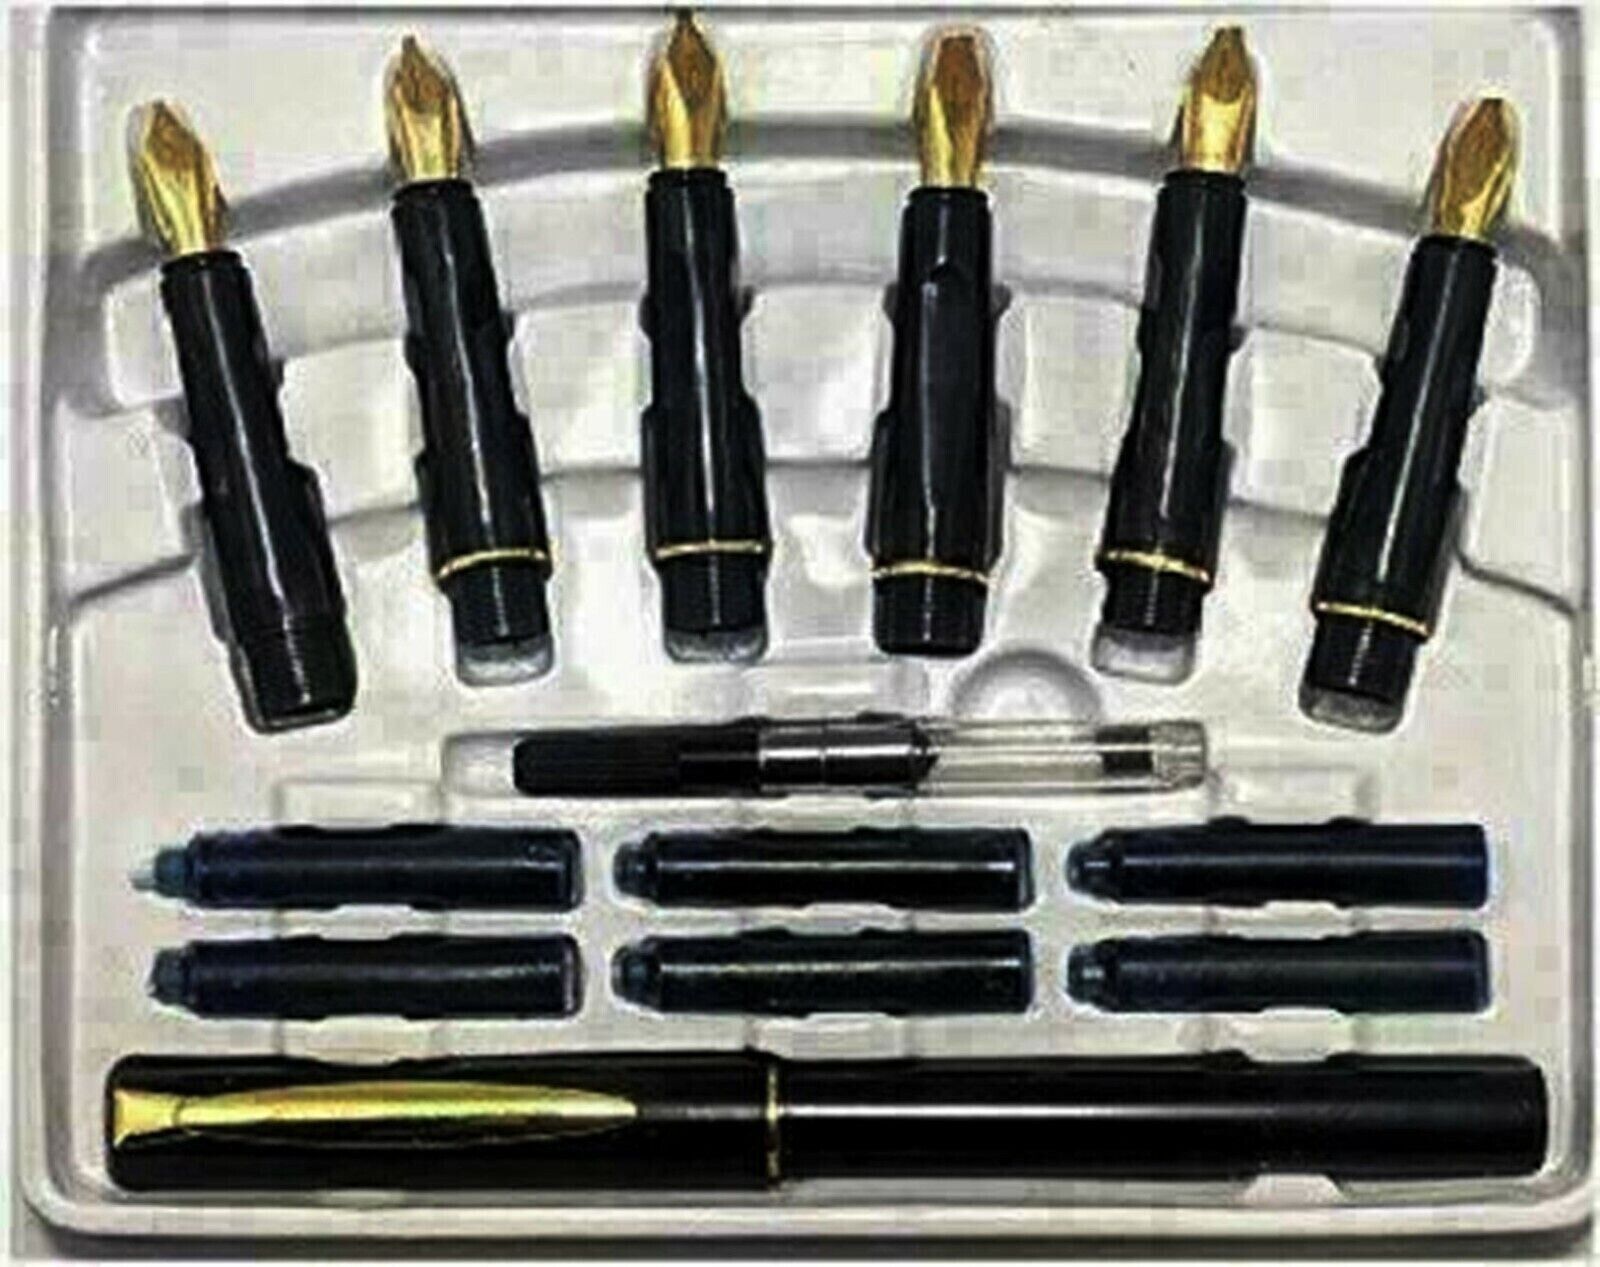 Calligraphy Fountain Pen Set 6 Nibs and 1 Pen 22 Carat Gold Plated 